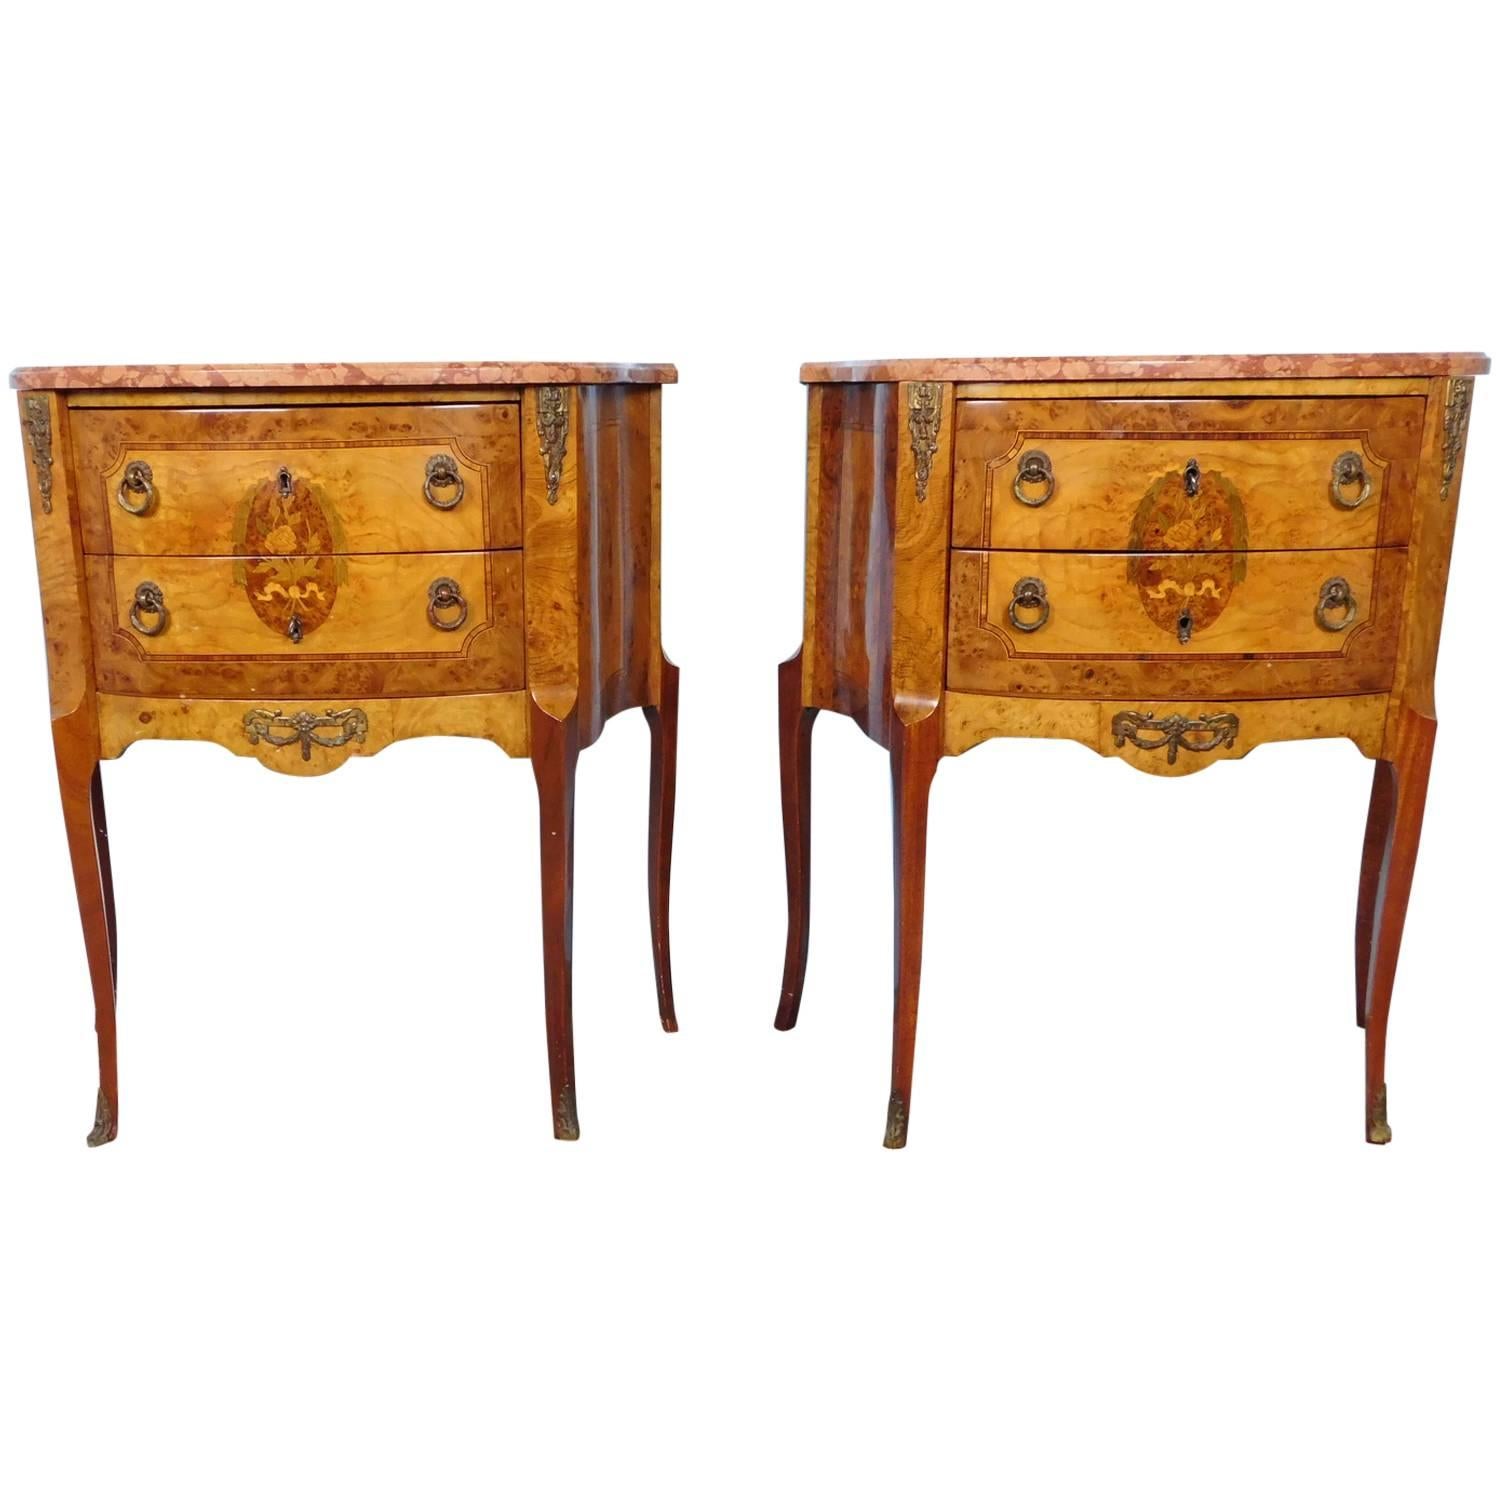 Pair of Marble Top Inlaid Satinwood French Side Tables, circa 1930